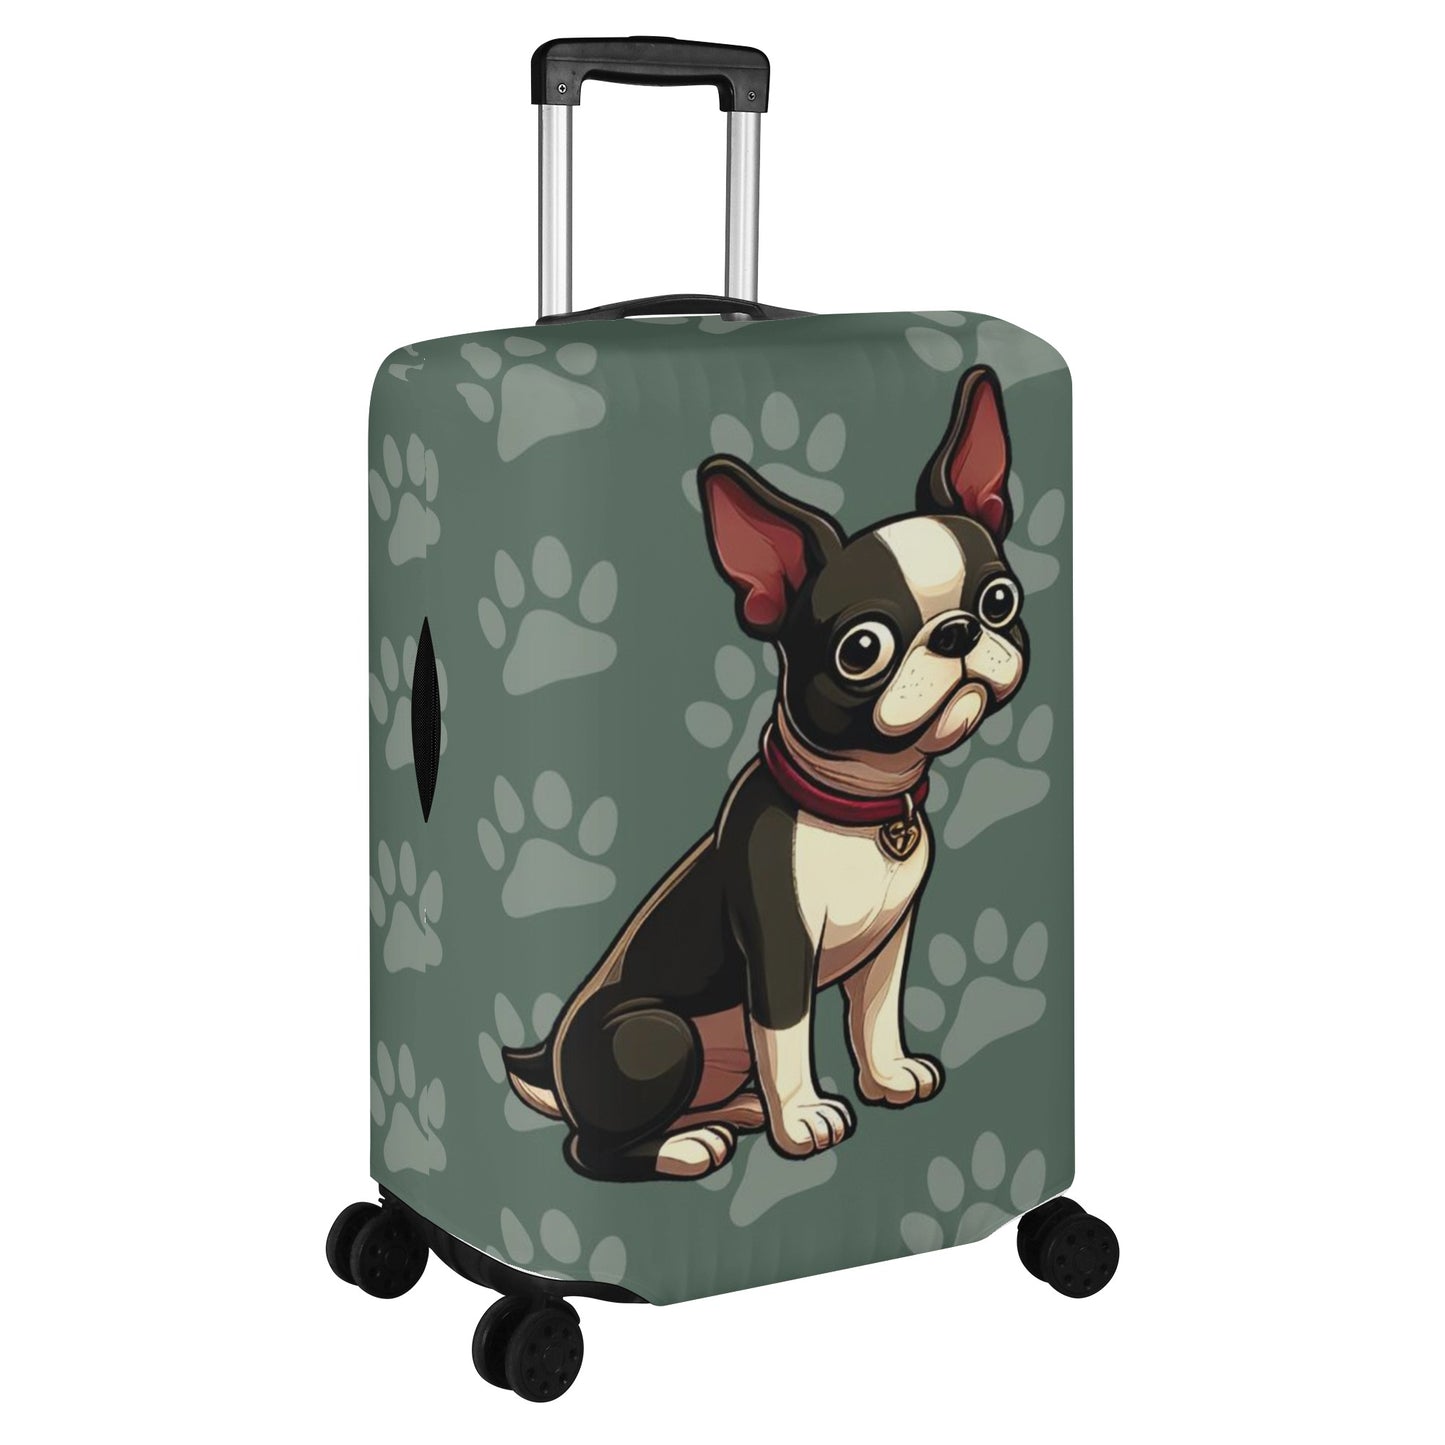 Riley  - Luggage Cover for Boston Terrier lovers